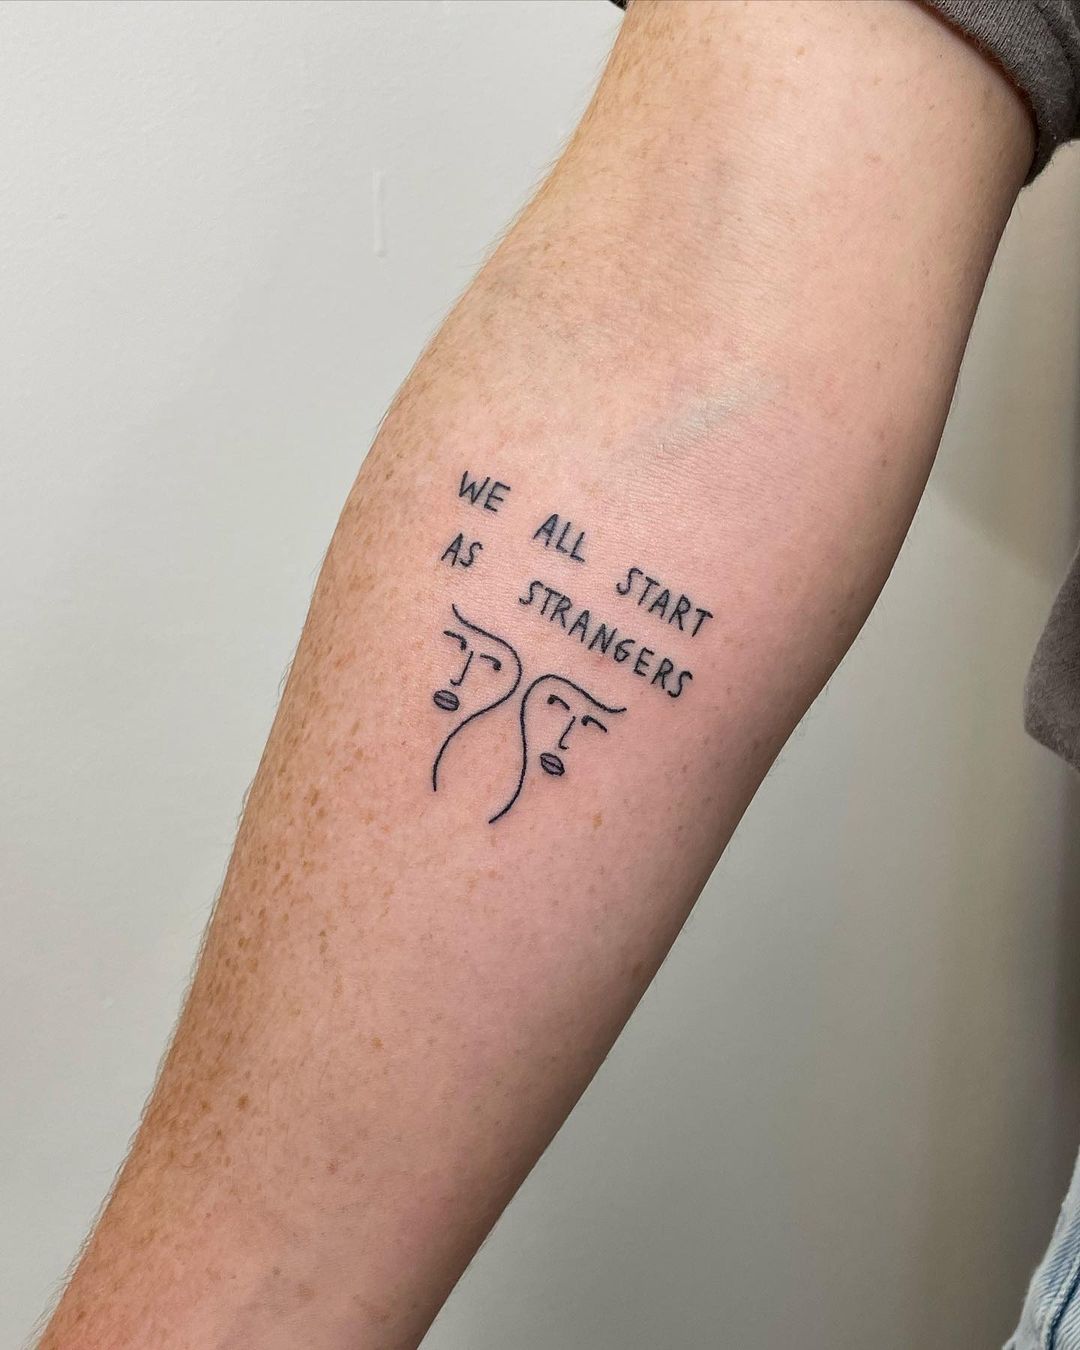 44 Meaningful Quote Tattoos to Memorize Your Special Moments